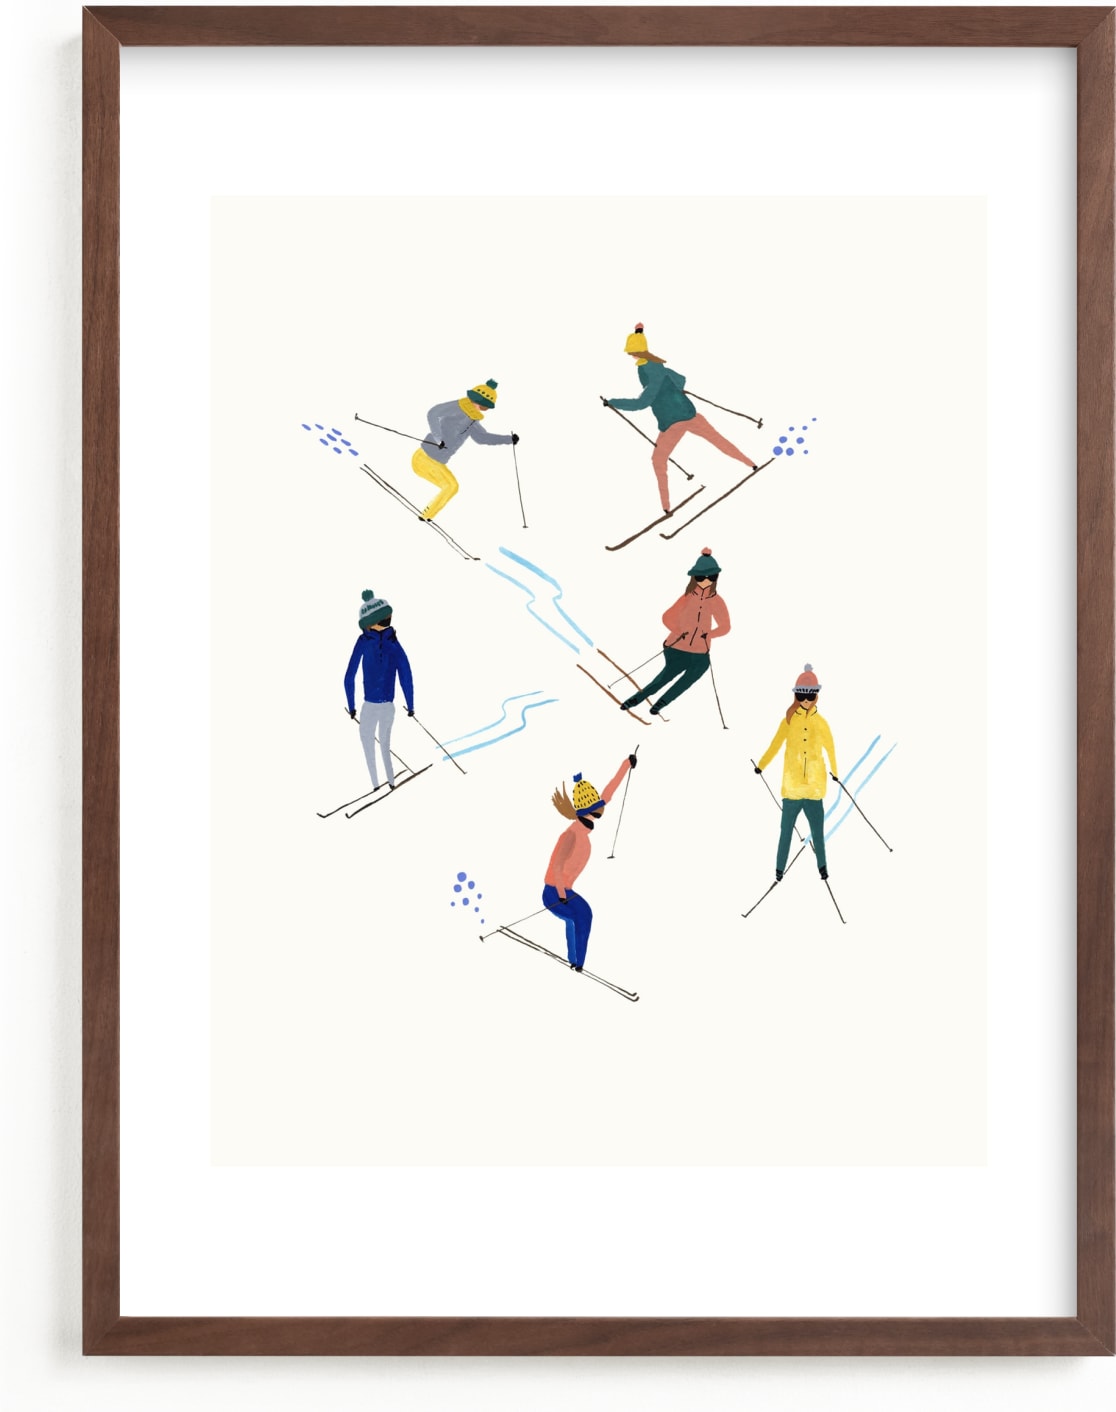 This is a blue kids wall art by Anee Shah called Ski people.